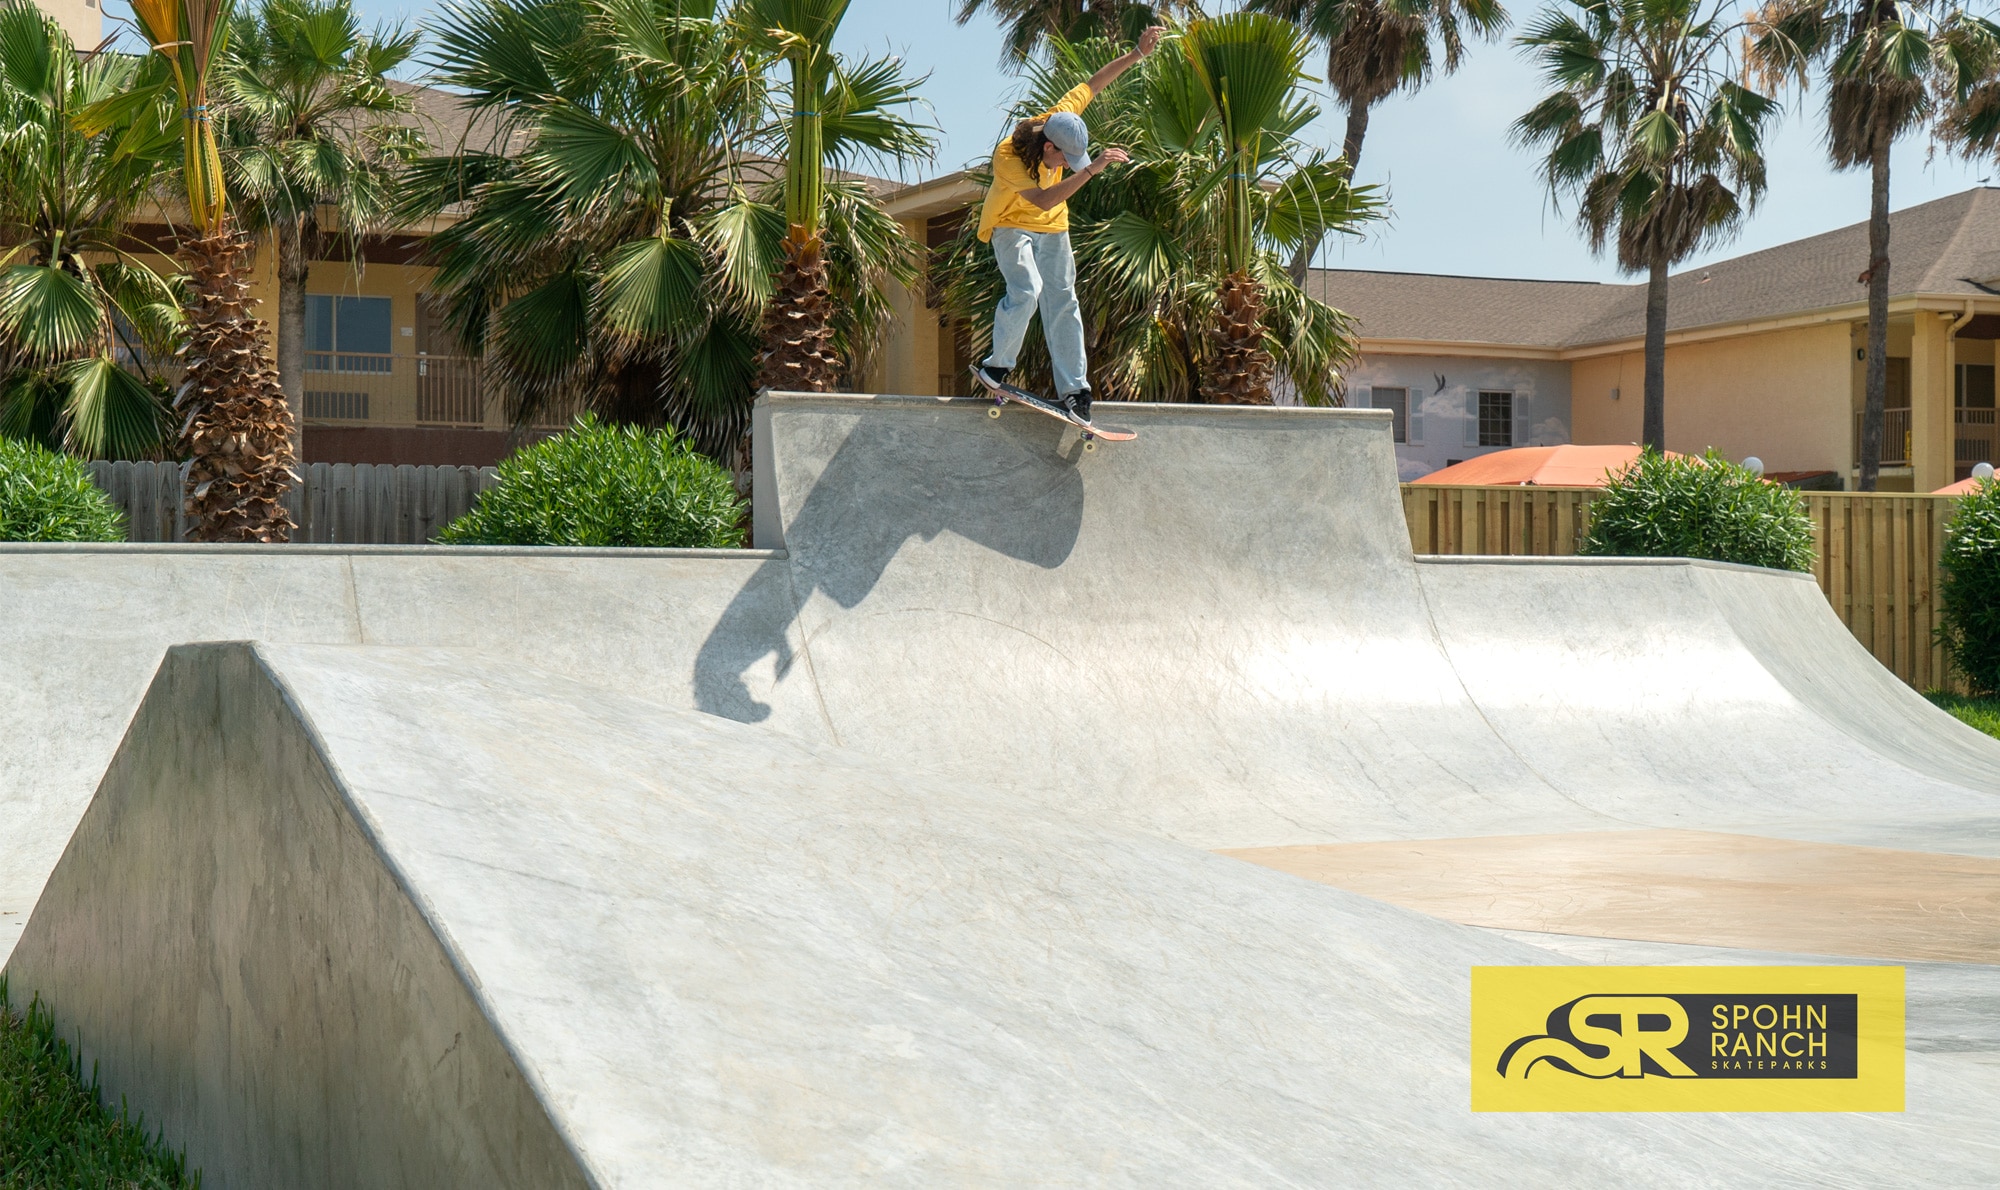 South Padre Island Skatepark in Texas home to Mikey Whitehouse backside smiths and amazing pyramids and transitions